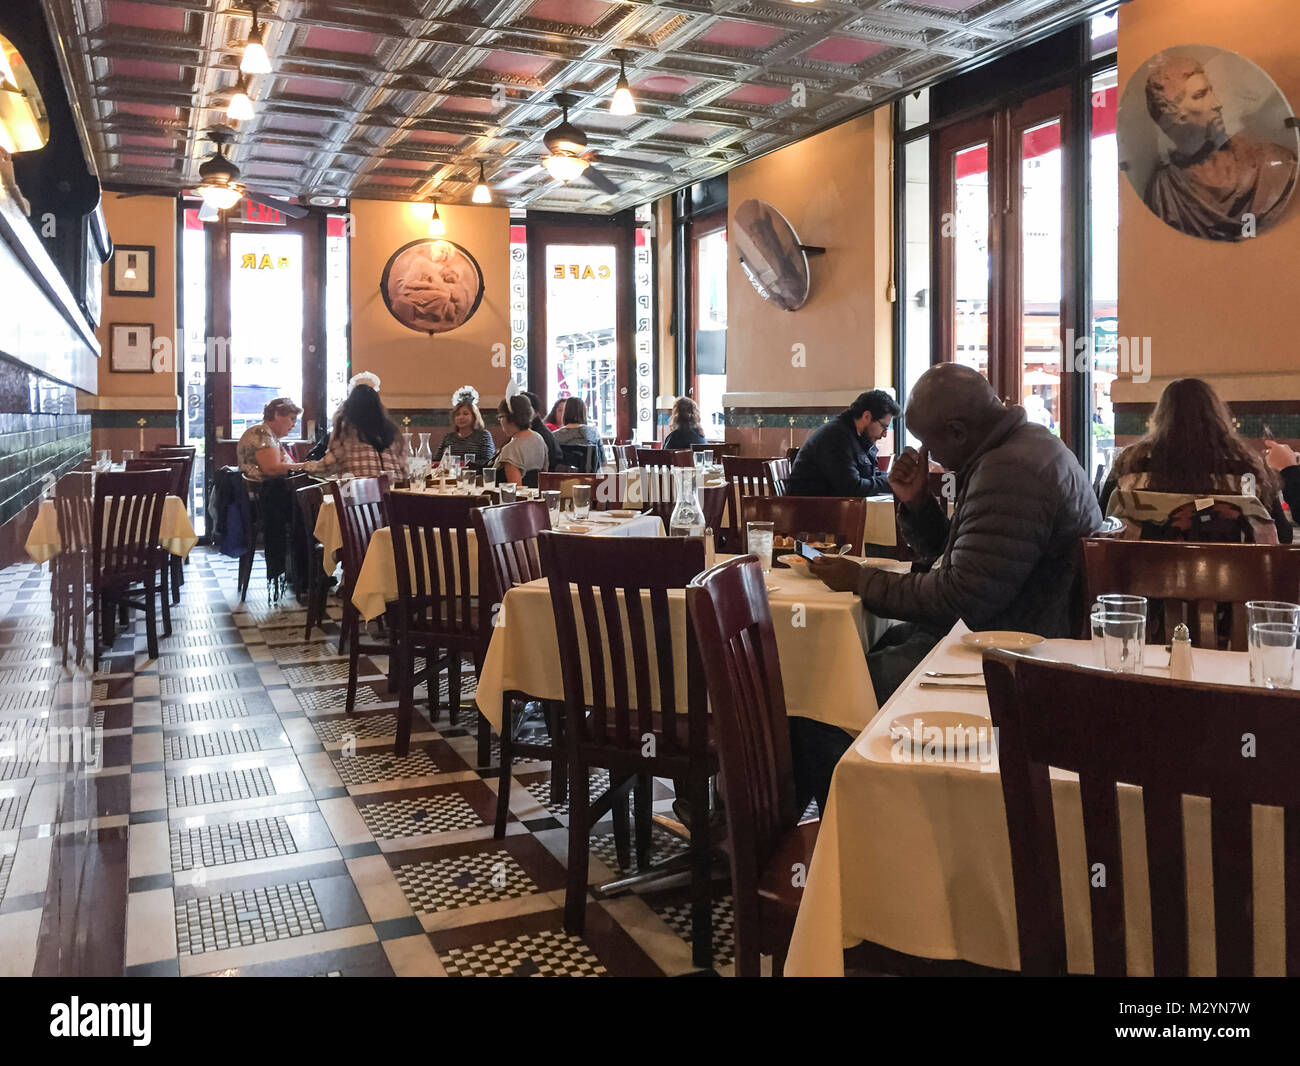 Interior of Grotto Azzurra in the Little Italy neighborhood, Manhattan, New York City. People dining out in traditional Italian restaurant. Stock Photo